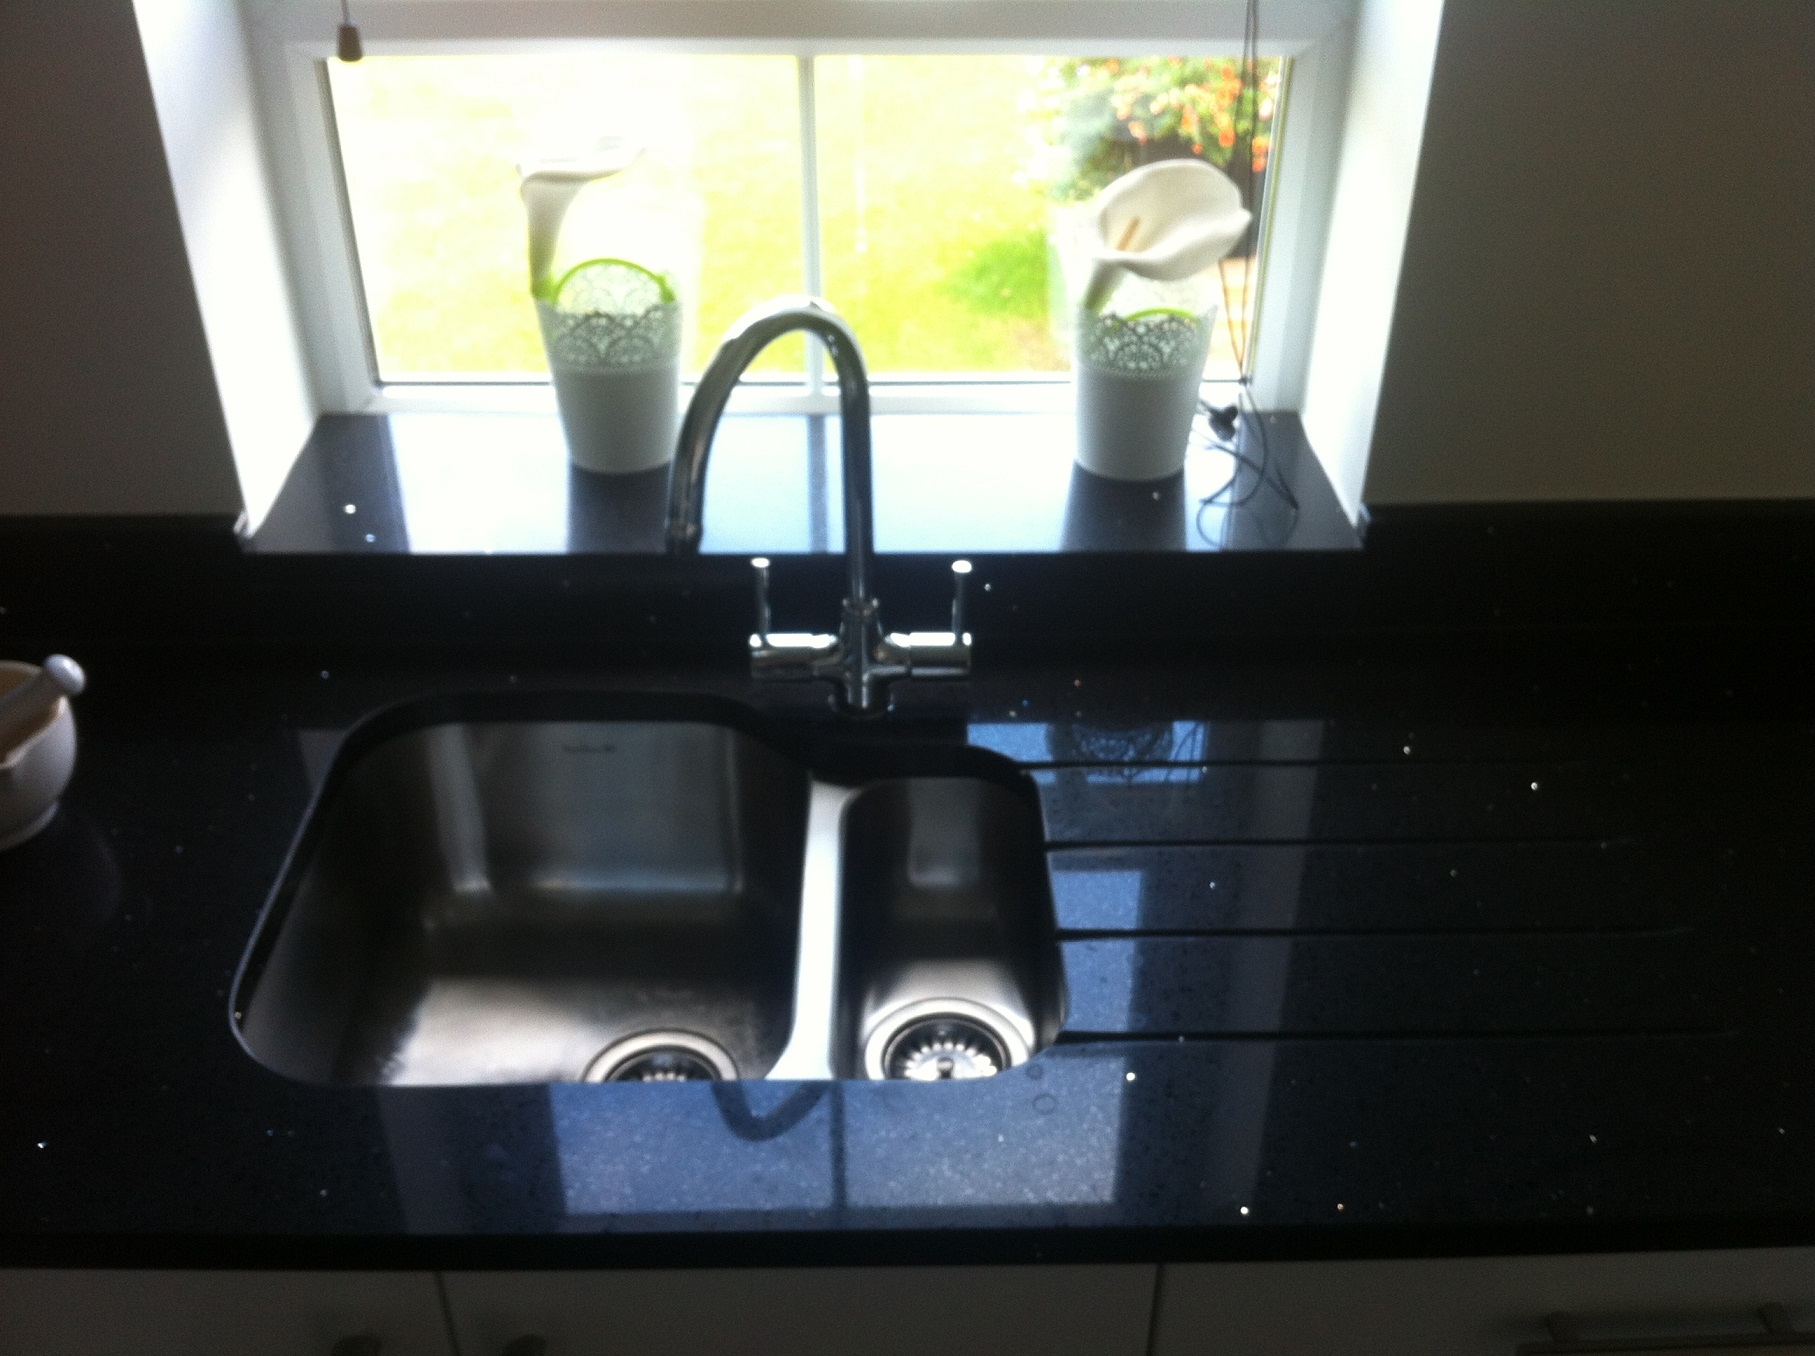 We supply Granite and Quartz Worktops in the penrith Area. We supply Granite and Quartz Worktops in the Carlisle Area. We supply Granite and Quartz Worktops in the Kendal Area. We supply Granite and Quartz Worktops in the Keswick Area. We supply Granite and Quartz Worktops in the Windermere Area. We supply Granite and Quartz Worktops in the Ambleside Area. We supply Granite and Quartz Worktops in the Cockermouth Area. We supply Granite and Quartz Worktops in the Barrow-in-Furness Area. We supply Granite and Quartz Worktops in the Whitehaven Area. We supply Granite and Quartz Worktops in the Mayport Area. We supply Granite and Quartz Worktops in the Ulverston Area. We supply Granite and Quartz Worktops in the Kirkby-Stephen Area. We supply Granite and Quartz Worktops in the Workington Area. We supply Granite and Quartz Worktops in the Hawes Area. We supply Granite and Quartz Worktops in the Sedbergh Area. We supply Granite and Quartz Worktops in the Ingleton Area. We supply Granite and Quartz Worktops in the Milnthorpe Area. We supply Granite and Quartz Worktops in the Burton-in-Kendal Area. We supply Granite and Quartz Worktops in the Seascale Area. We supply Granite and Quartz Worktops in the Gosforth Area. We supply Granite and Quartz Worktops in the Wigton Area.